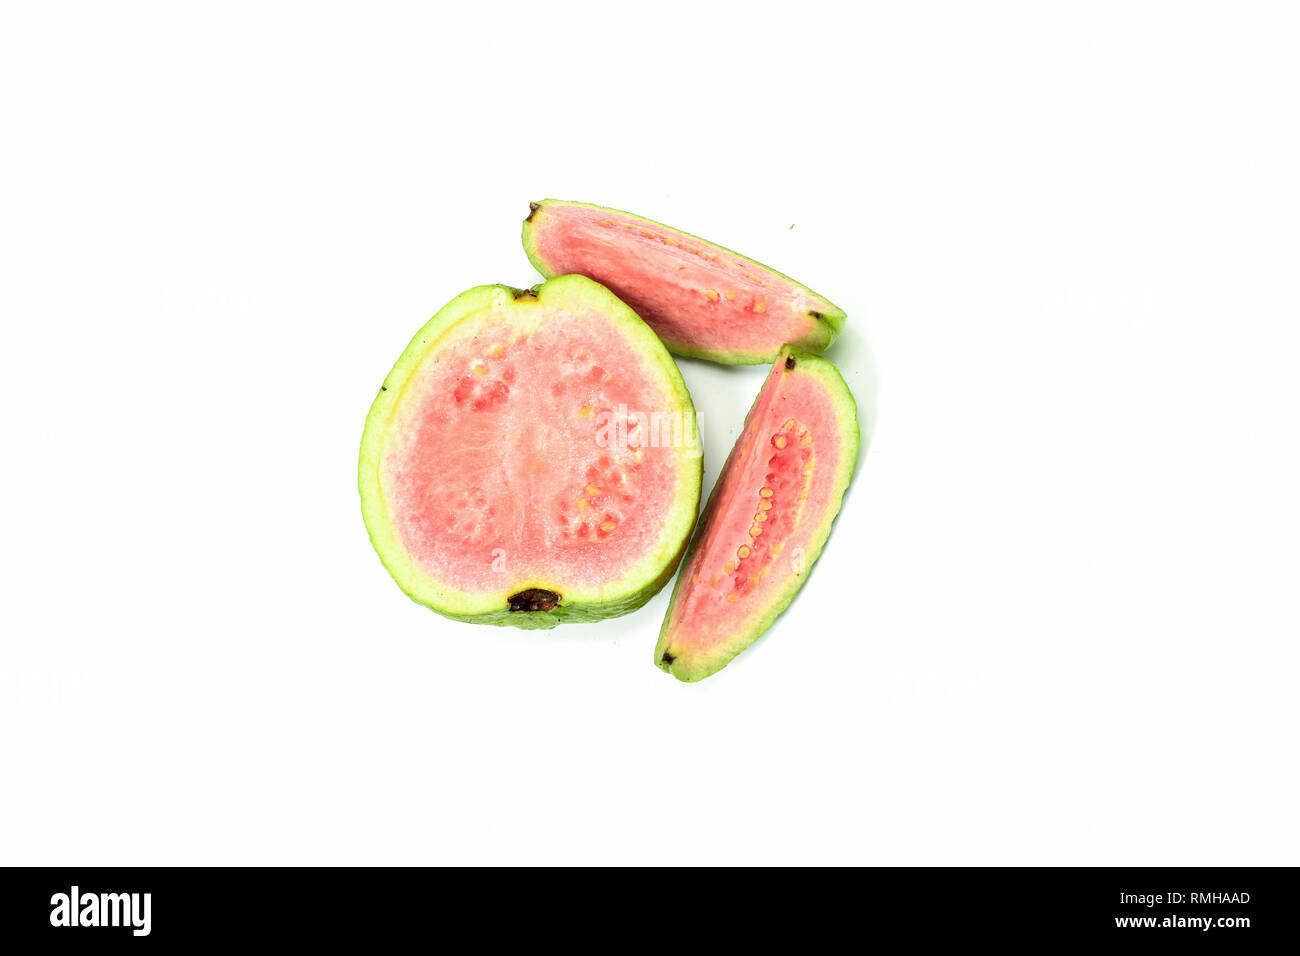 Red guava Stock Photo